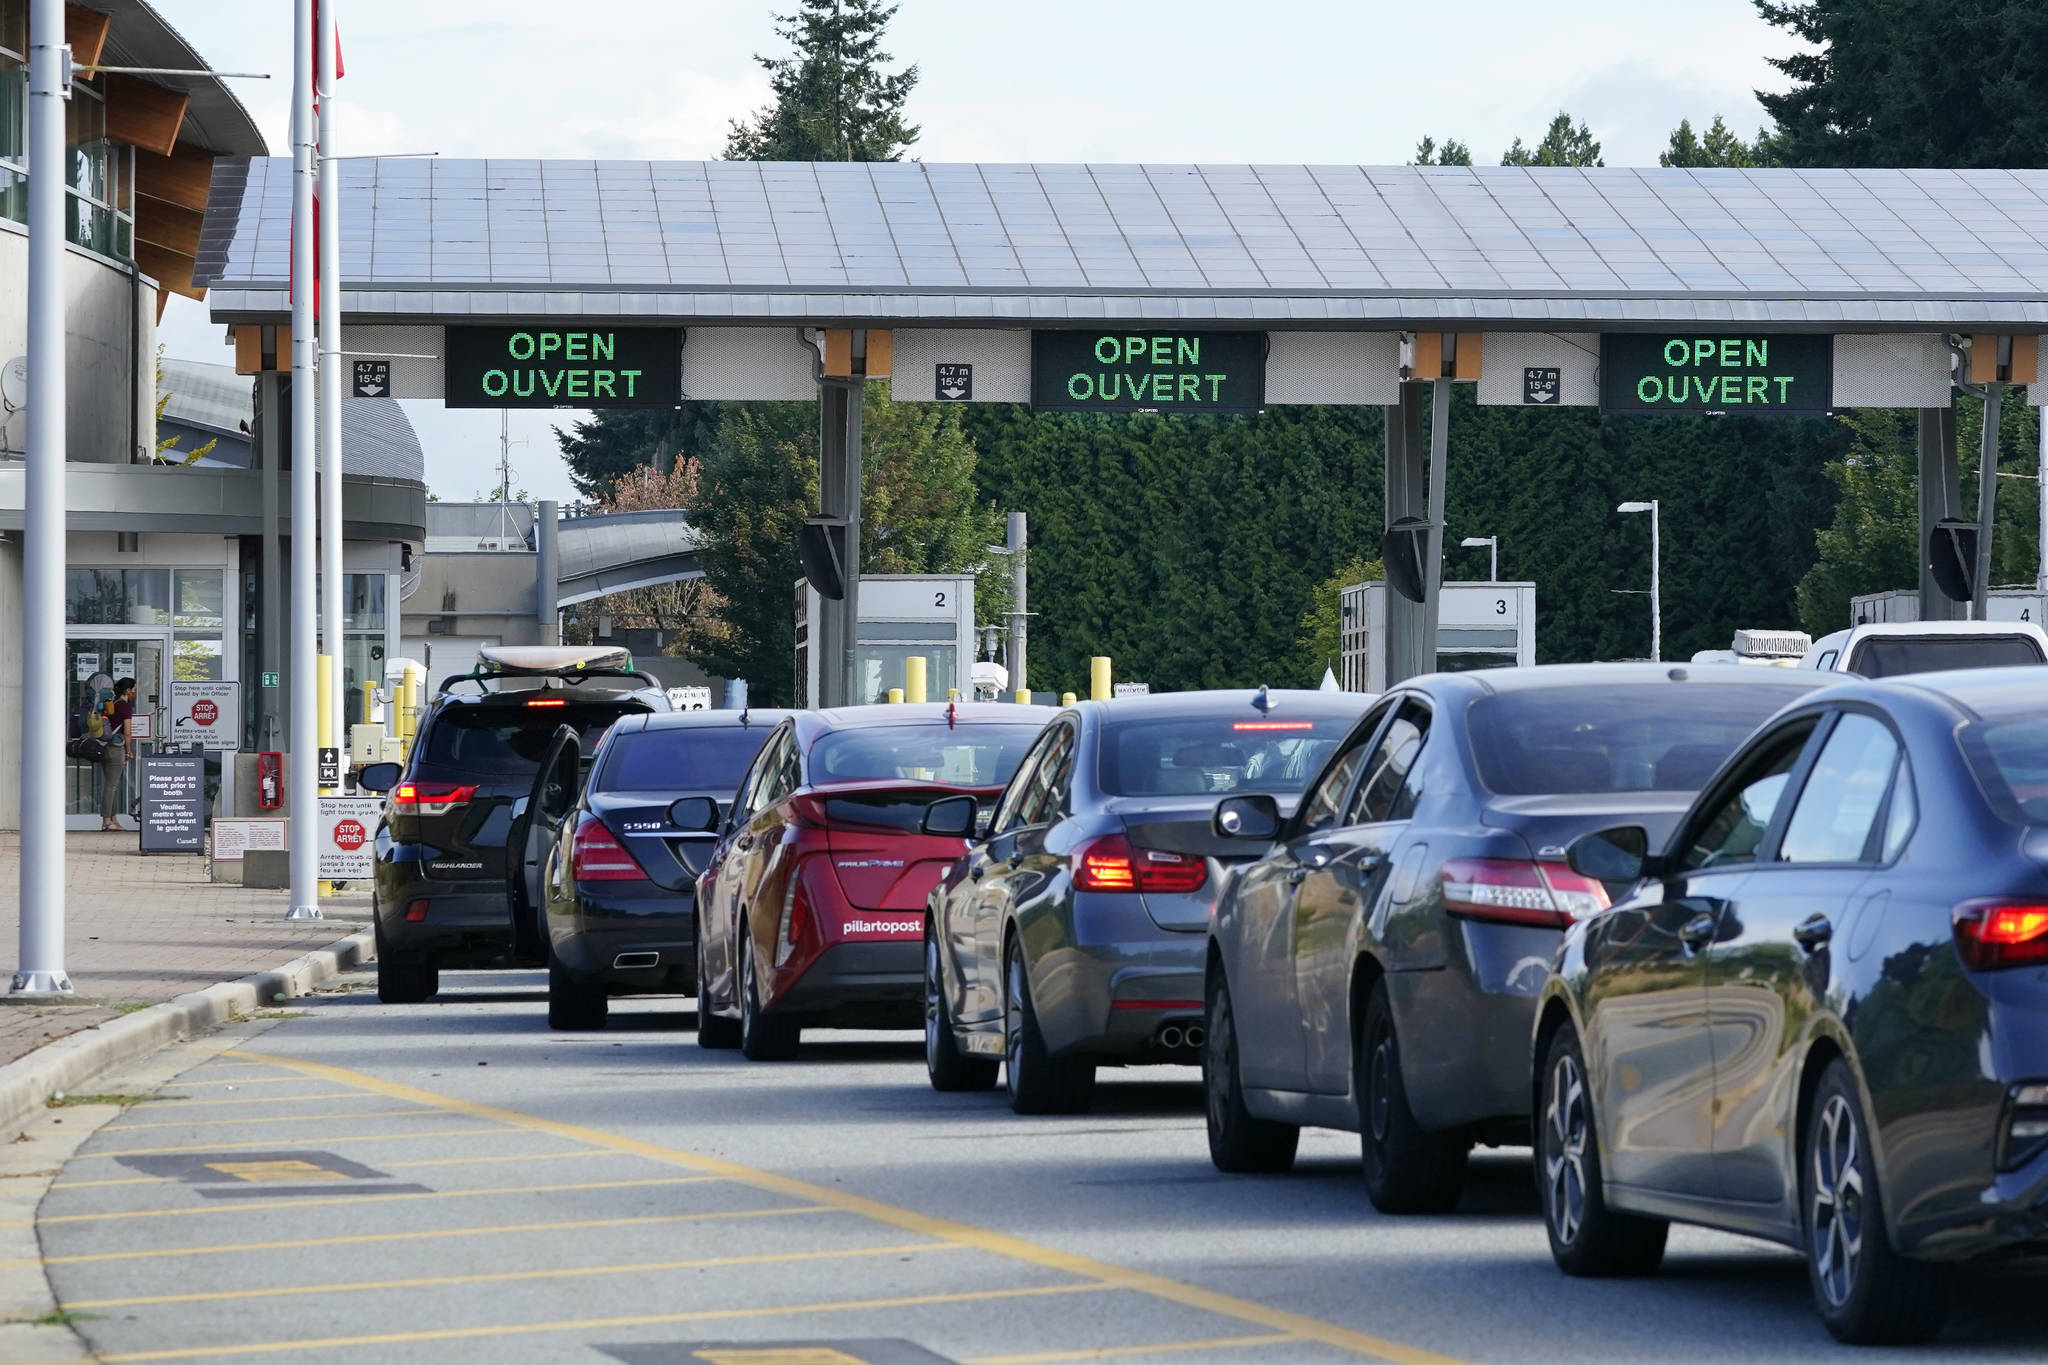 A line of vehicles wait to enter Canada at the Peace Arch border crossing Monday, Aug. 9, 2021, in Blaine, Wash. Canada lifted its prohibition on Americans crossing the border to shop, vacation or visit, but America kept similar restrictions in place, part of a bumpy return to normalcy from coronavirus travel bans. (AP Photo/Elaine Thompson)